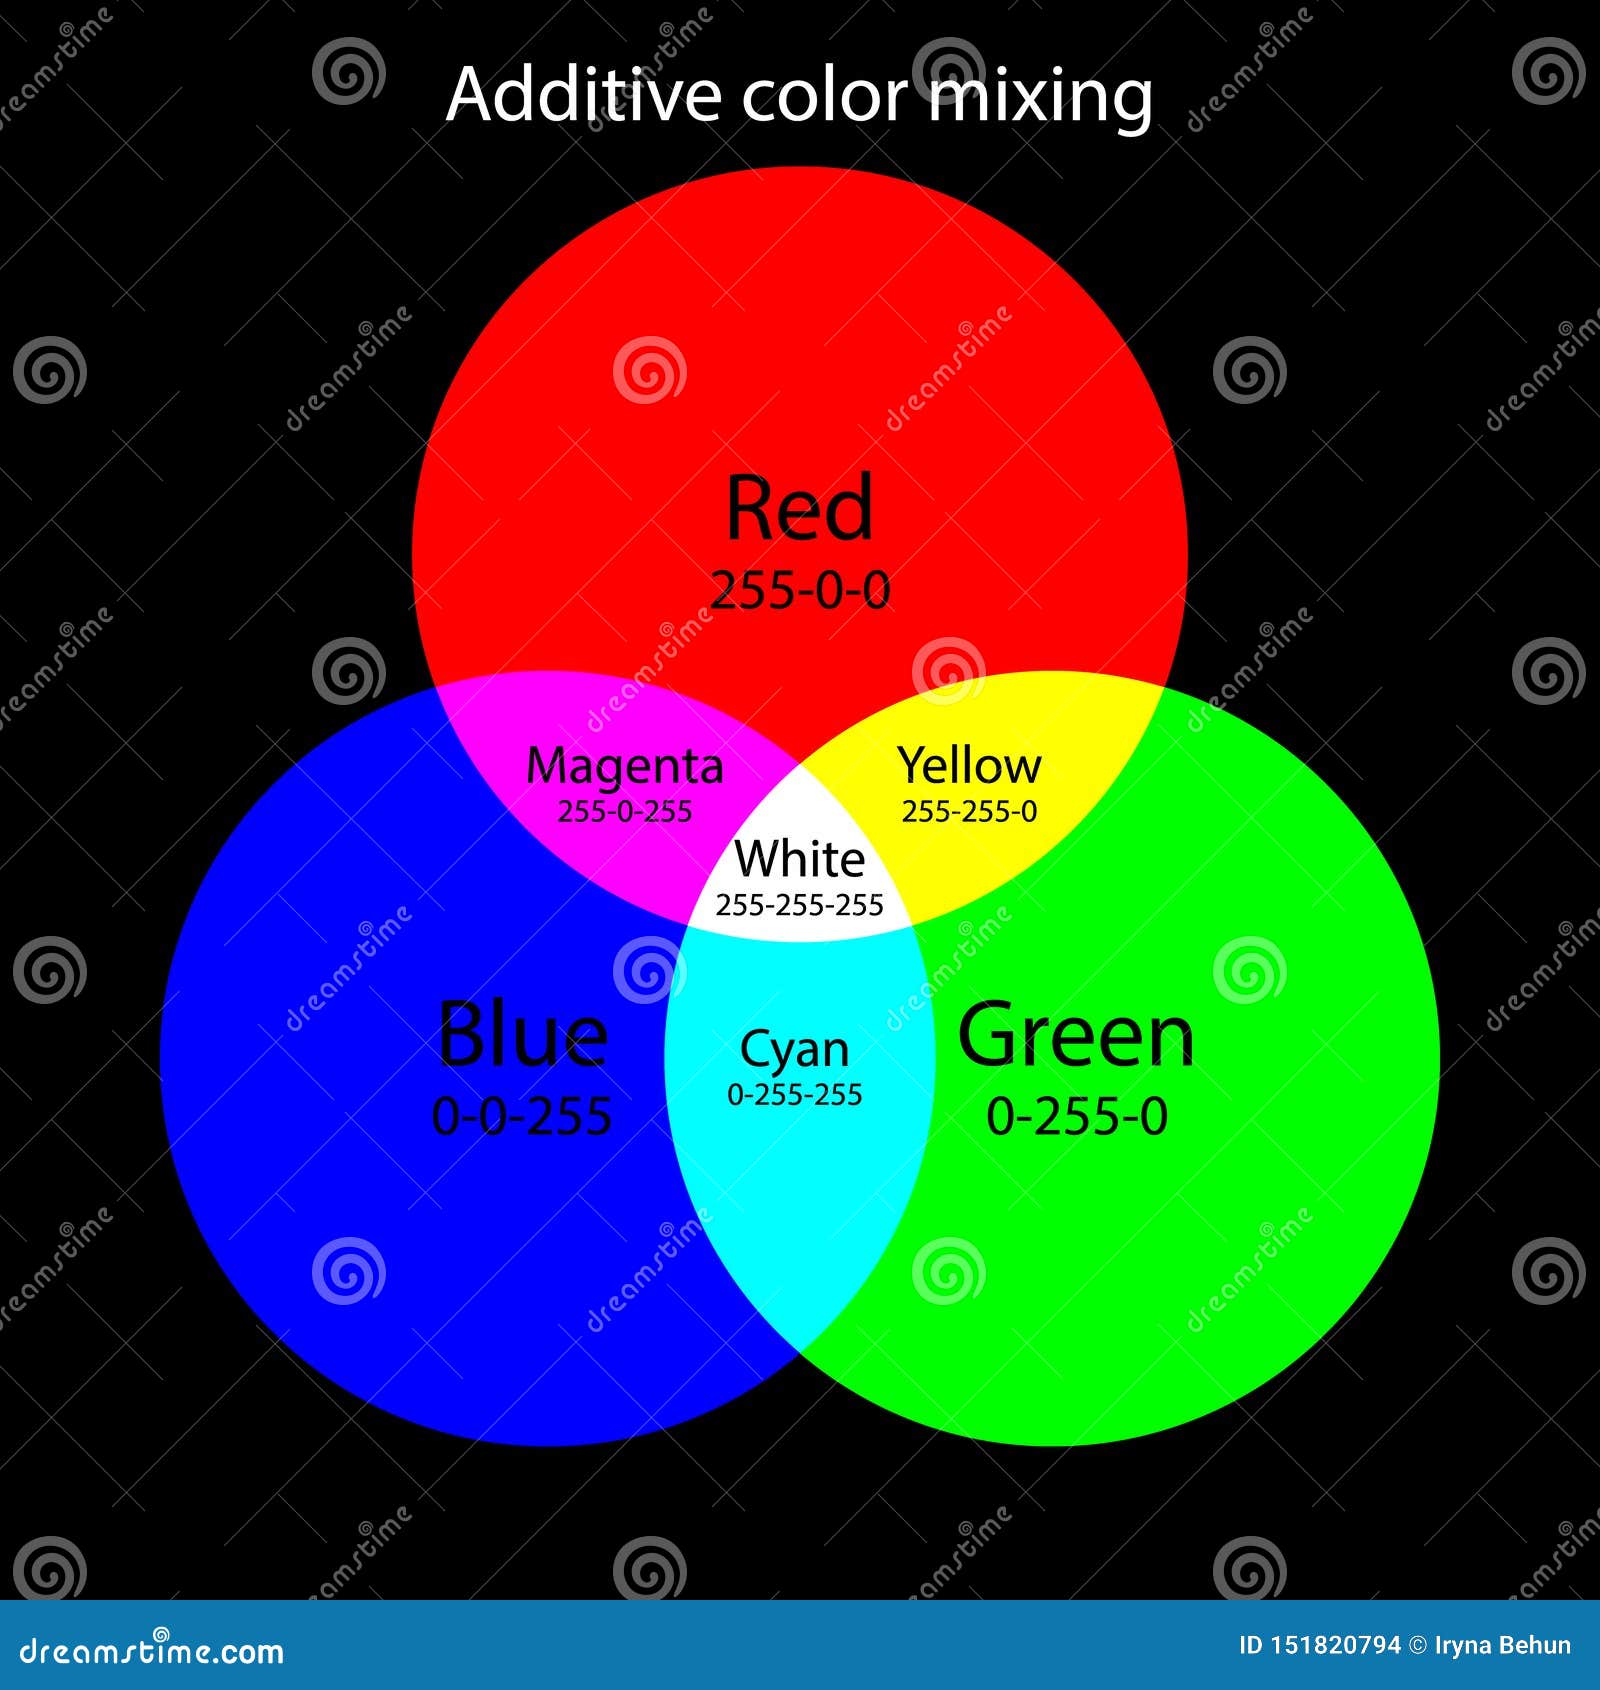 additive color mixing scheme. rgb colors theory